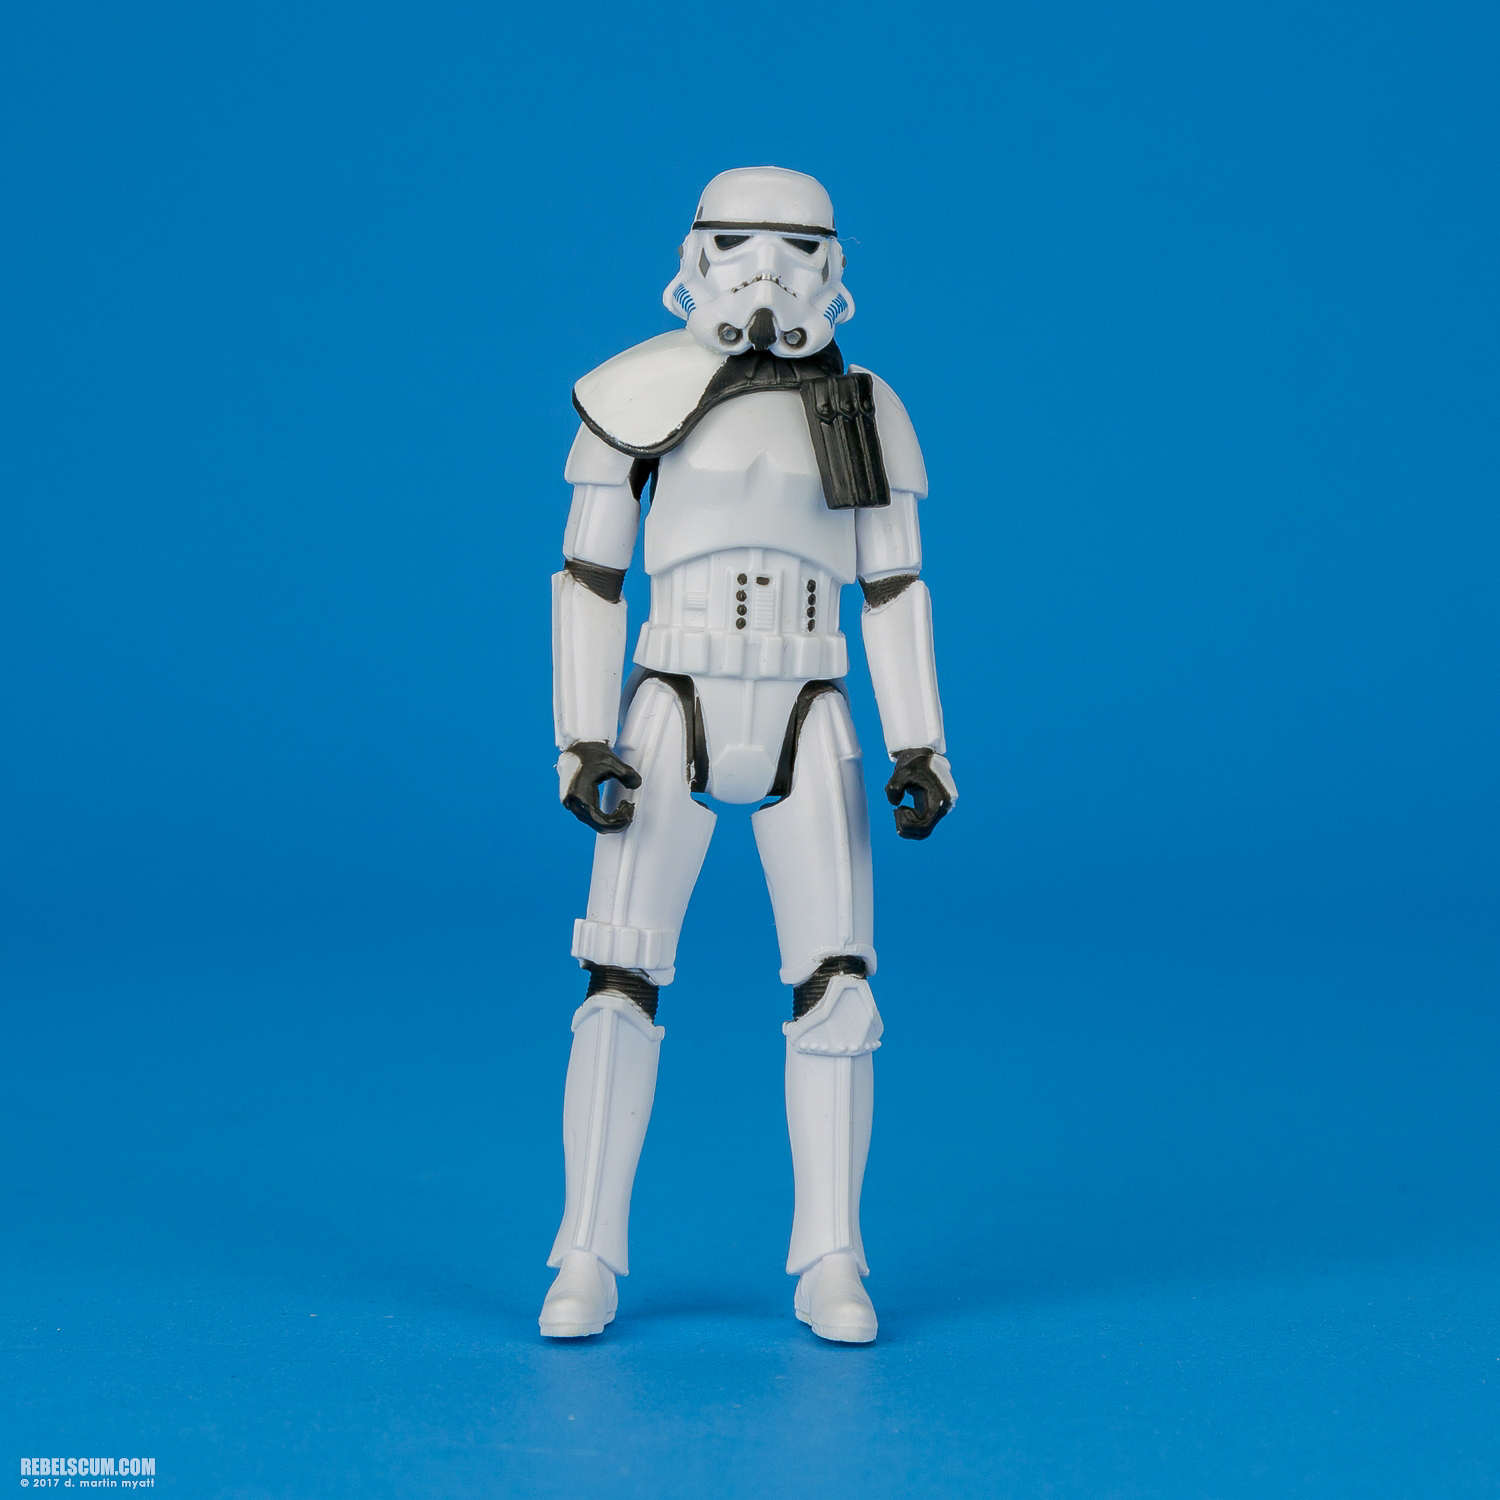 Kohls-Exclusive-Four-Pack-Rogue-One-B9605-014.jpg